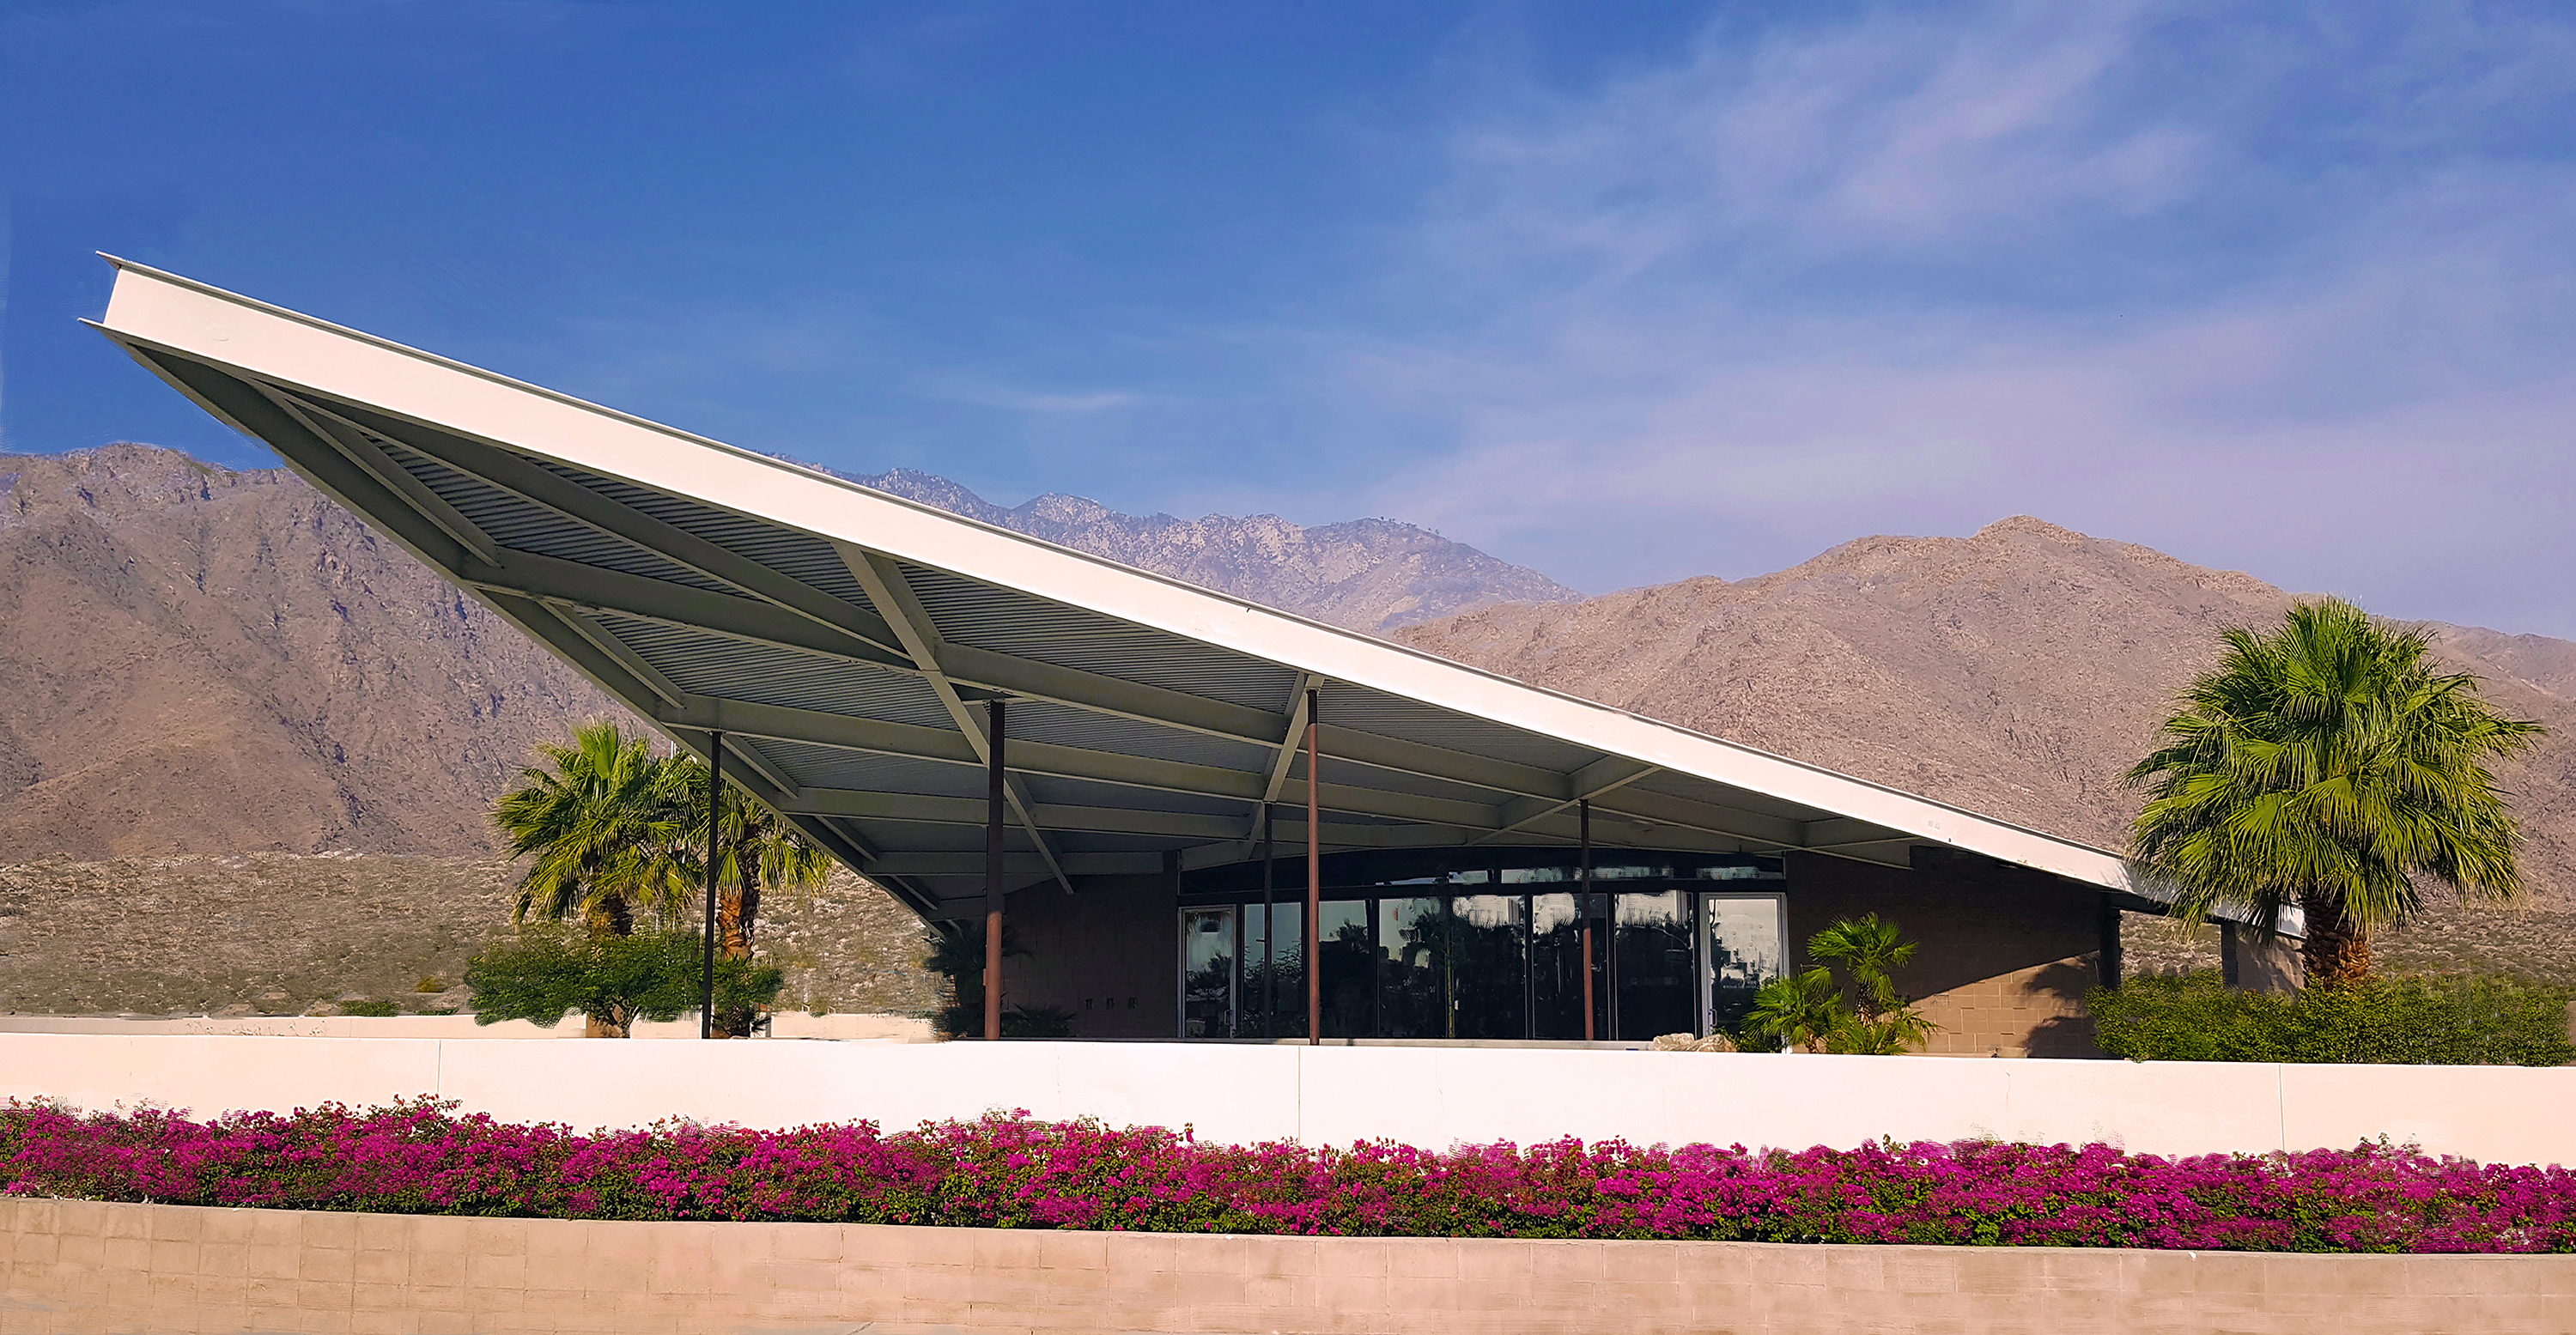 What's New in Palm Springs - Visit Palm Springs